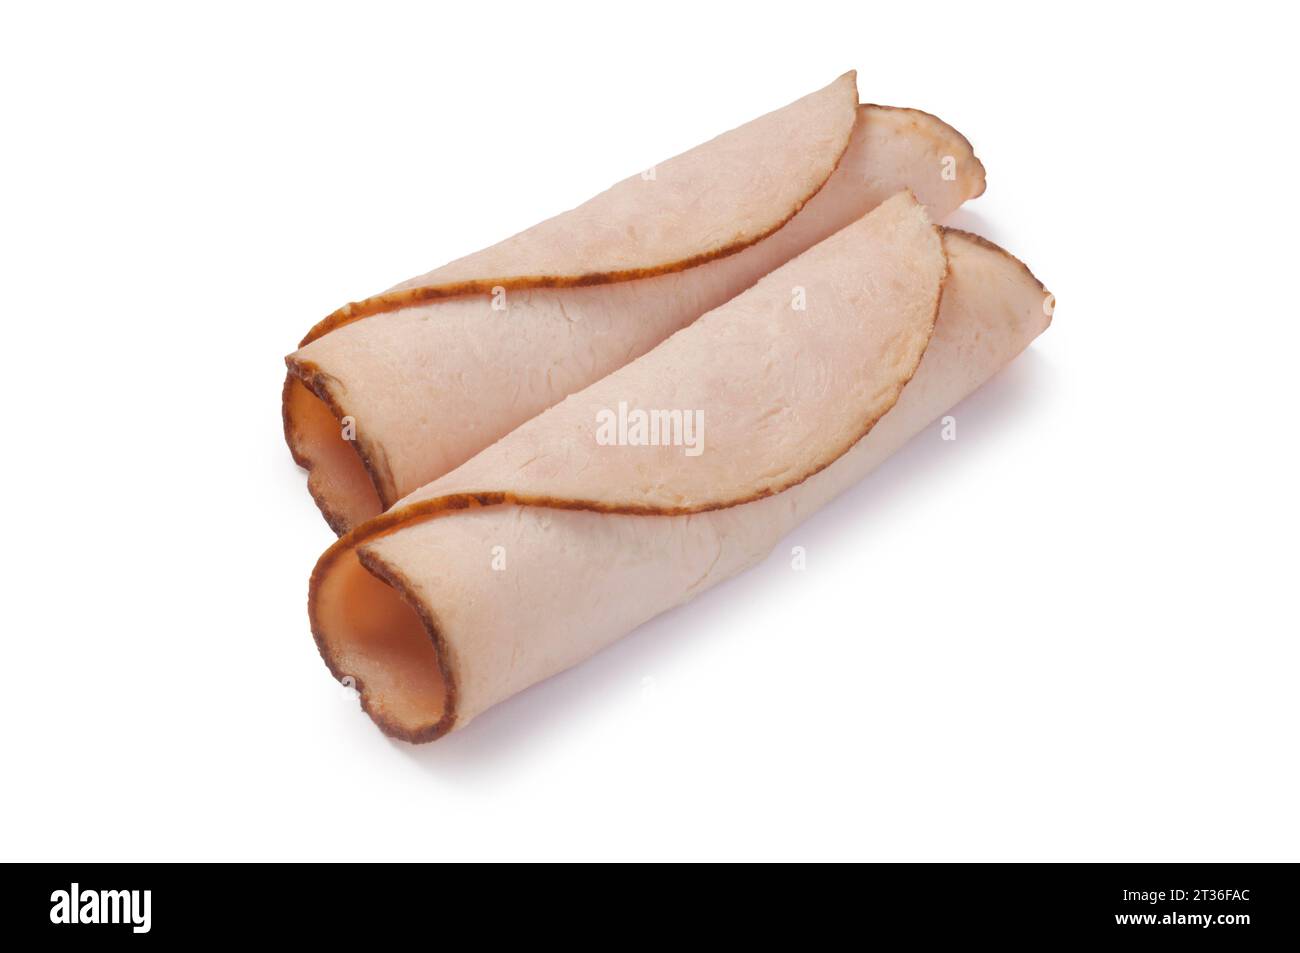 Studio shot of sliced turkey roll cut out against a white background - John Gollop Stock Photo